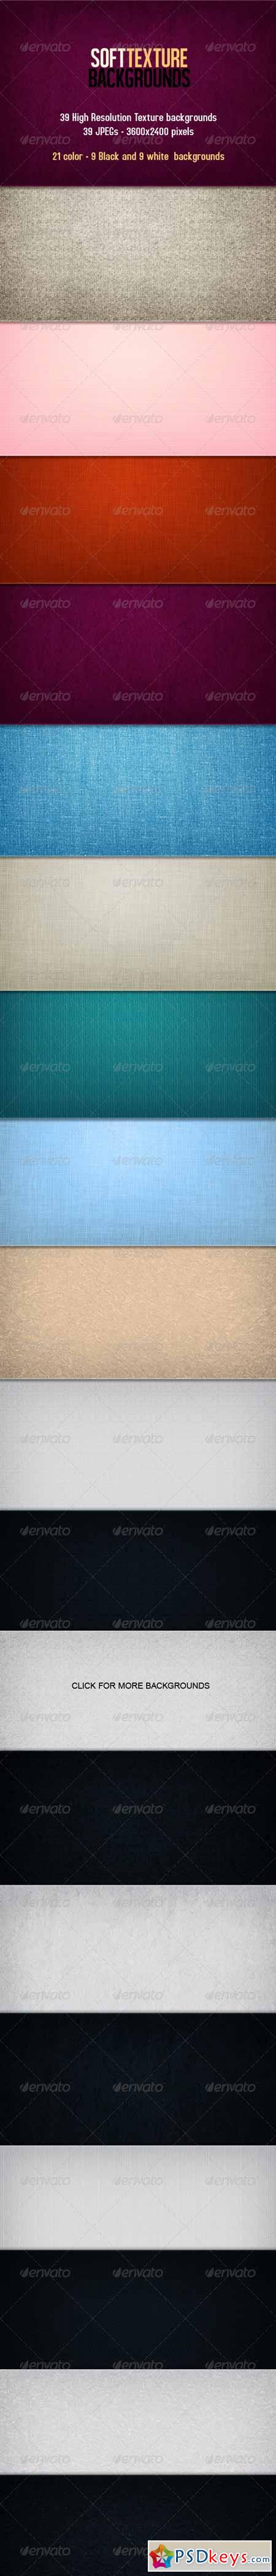 Soft Texture Backgrounds 4167479